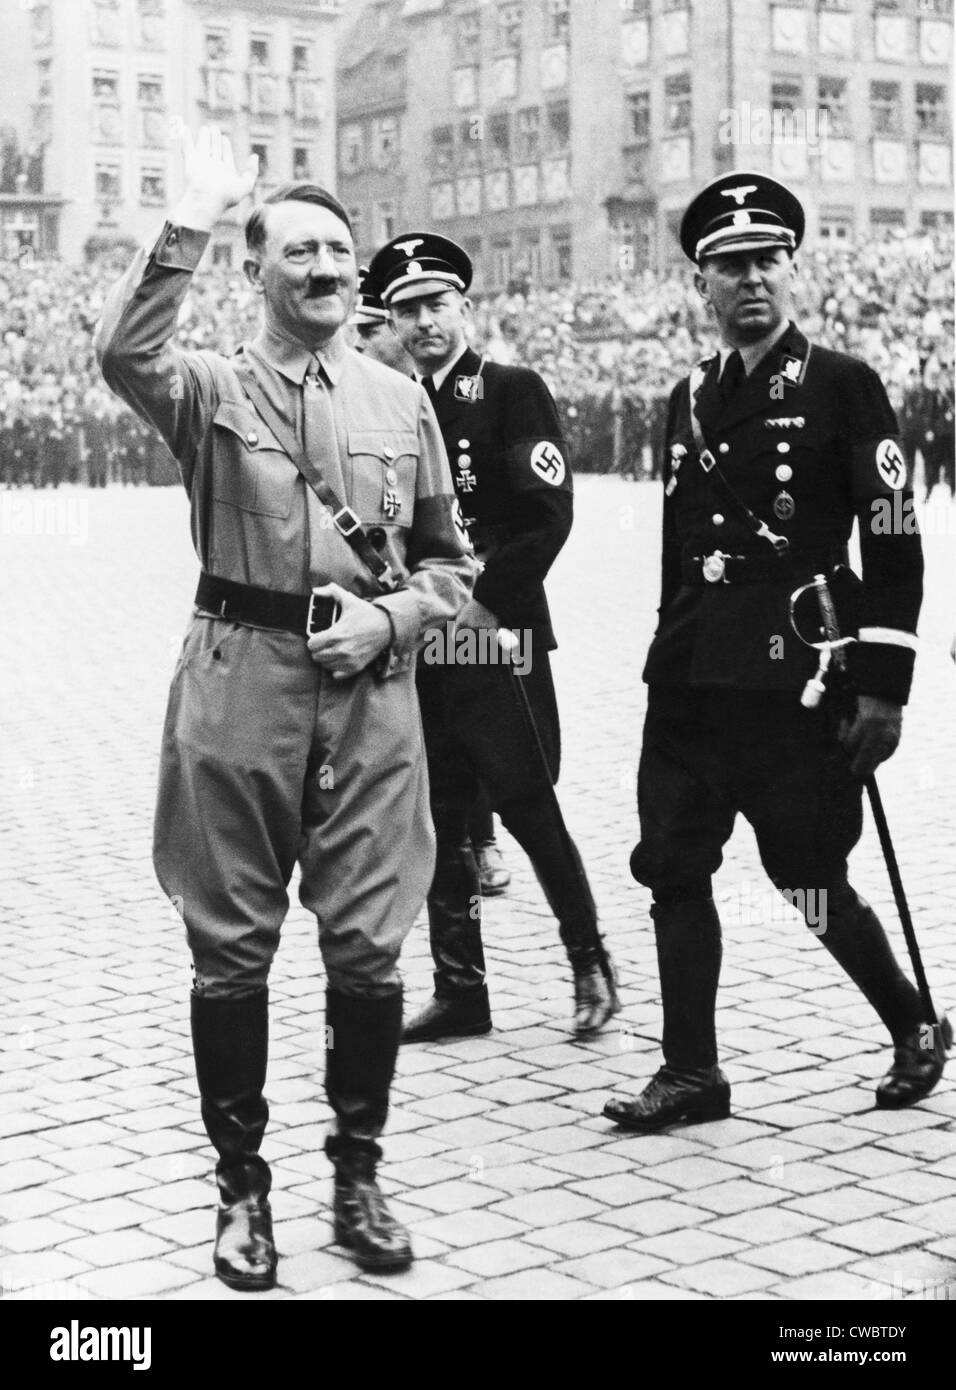 Adolf Hitler saluting, with two SS generals in uniform behind him, at